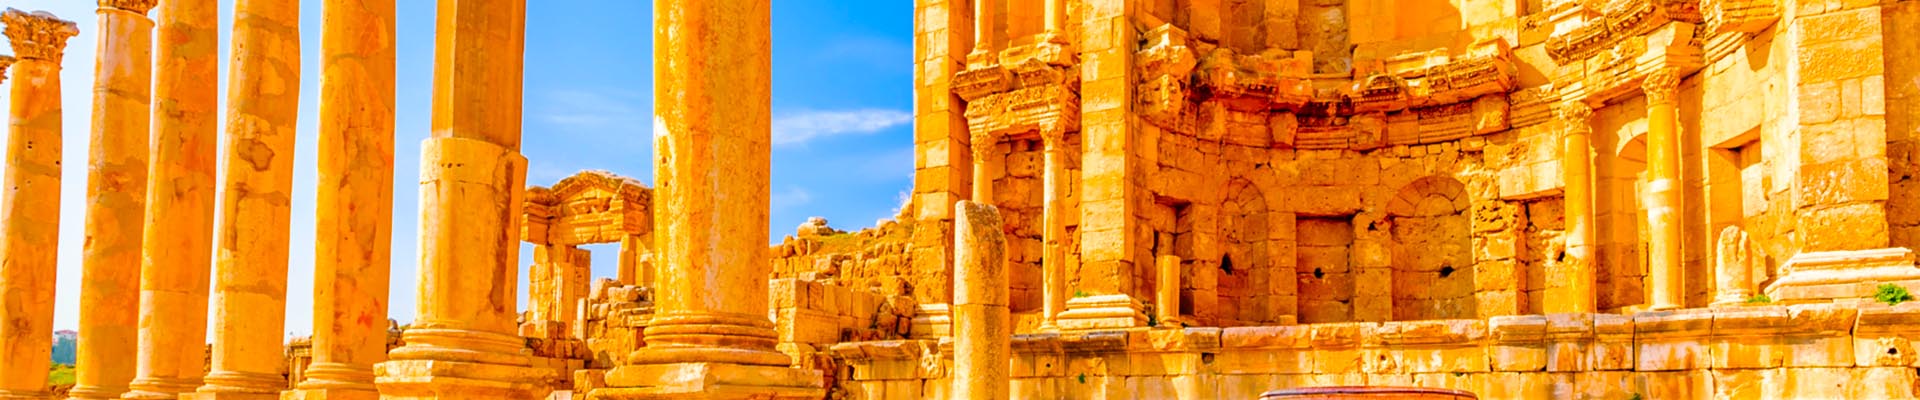 13 Day Israel and Jordan Private Tour